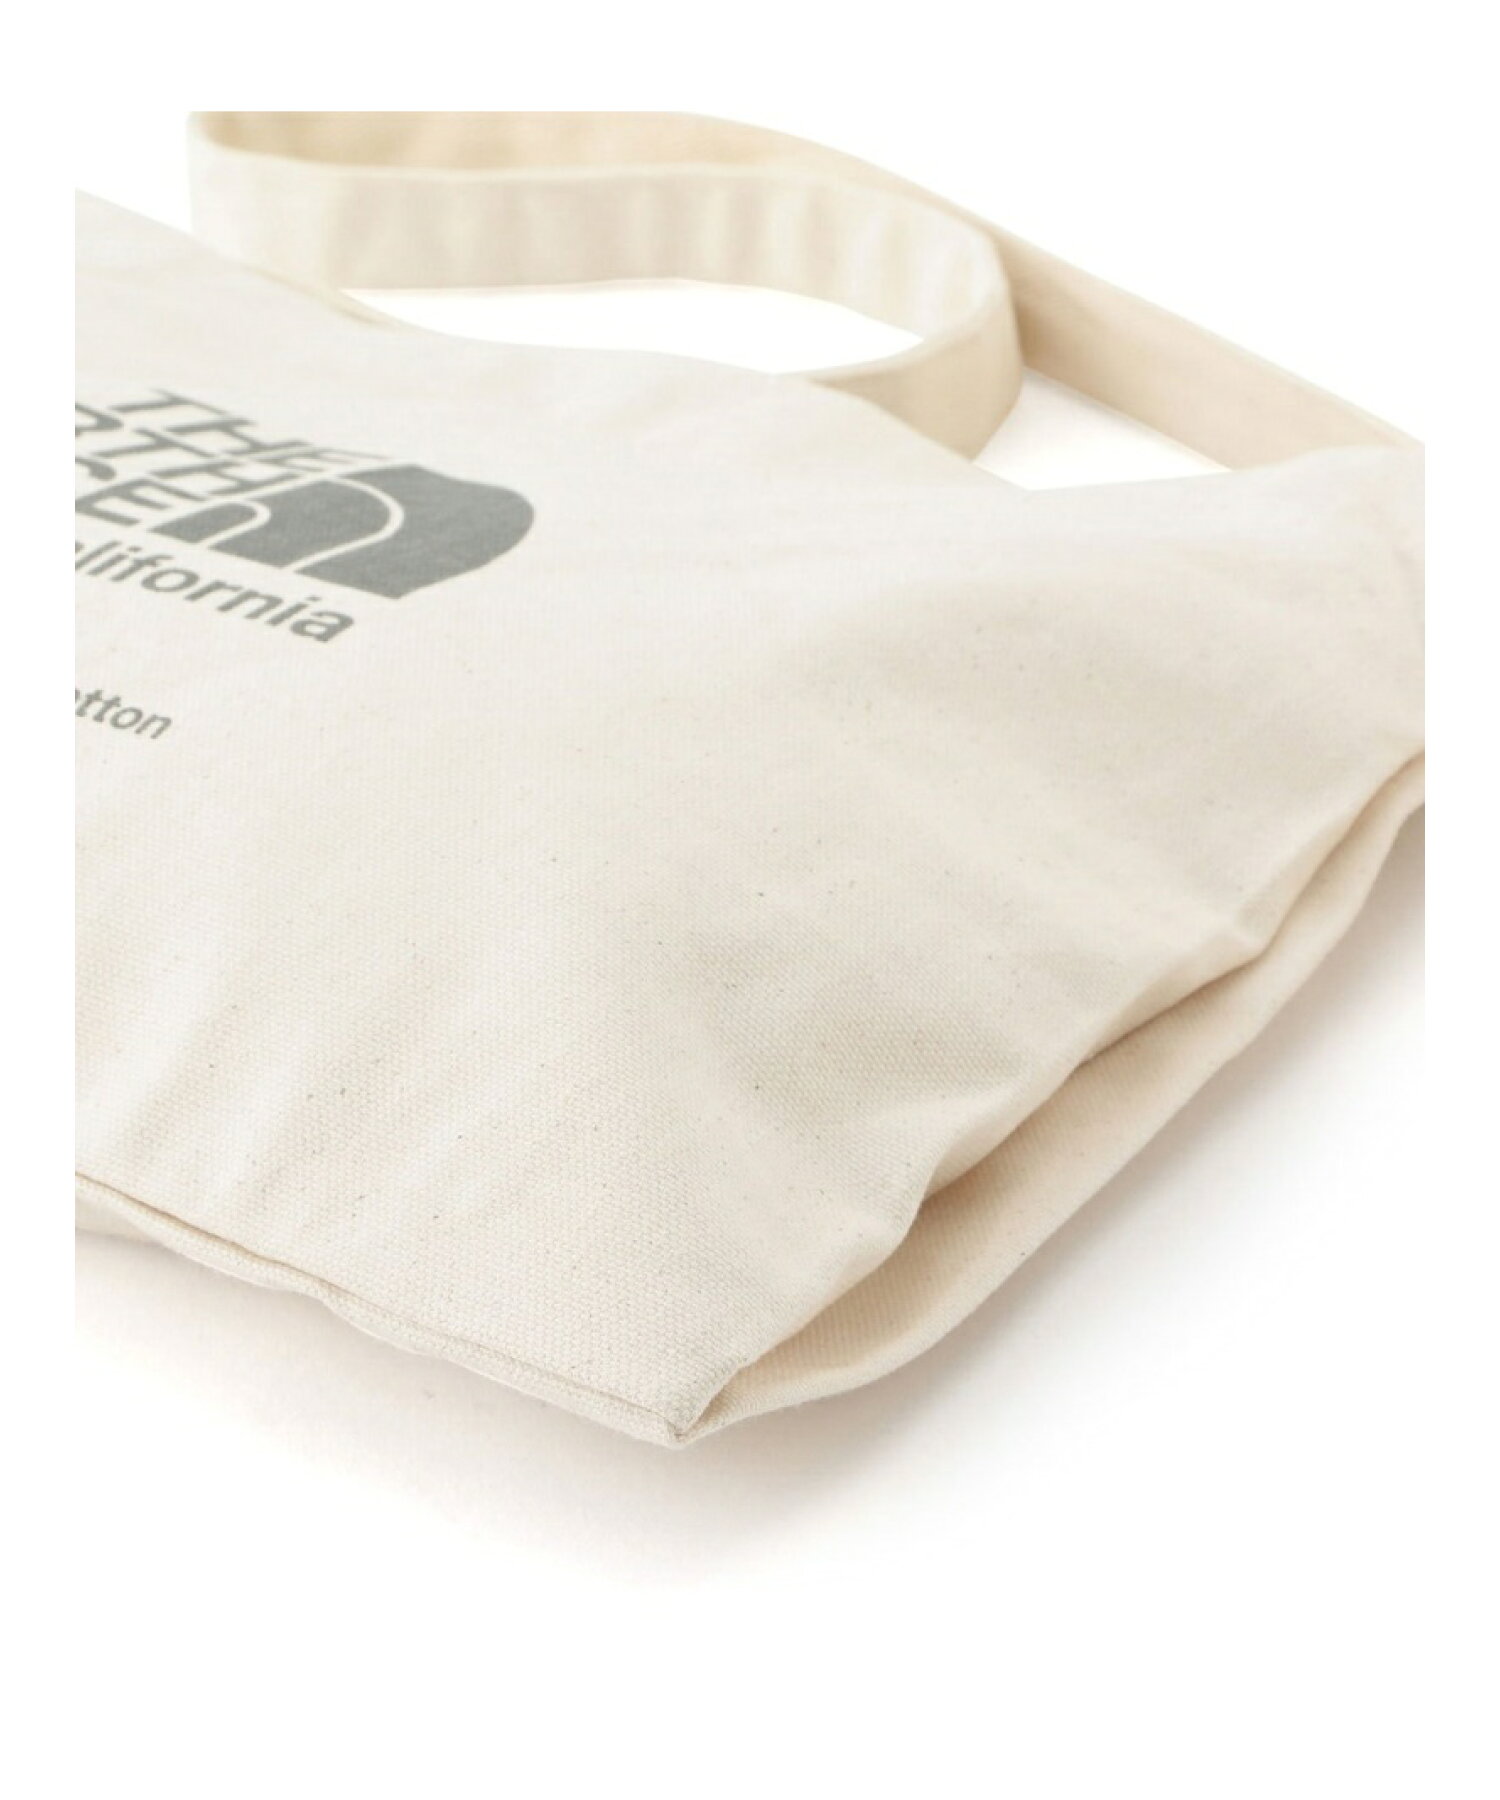 【THE NORTH FACE】TNF Musette Bag